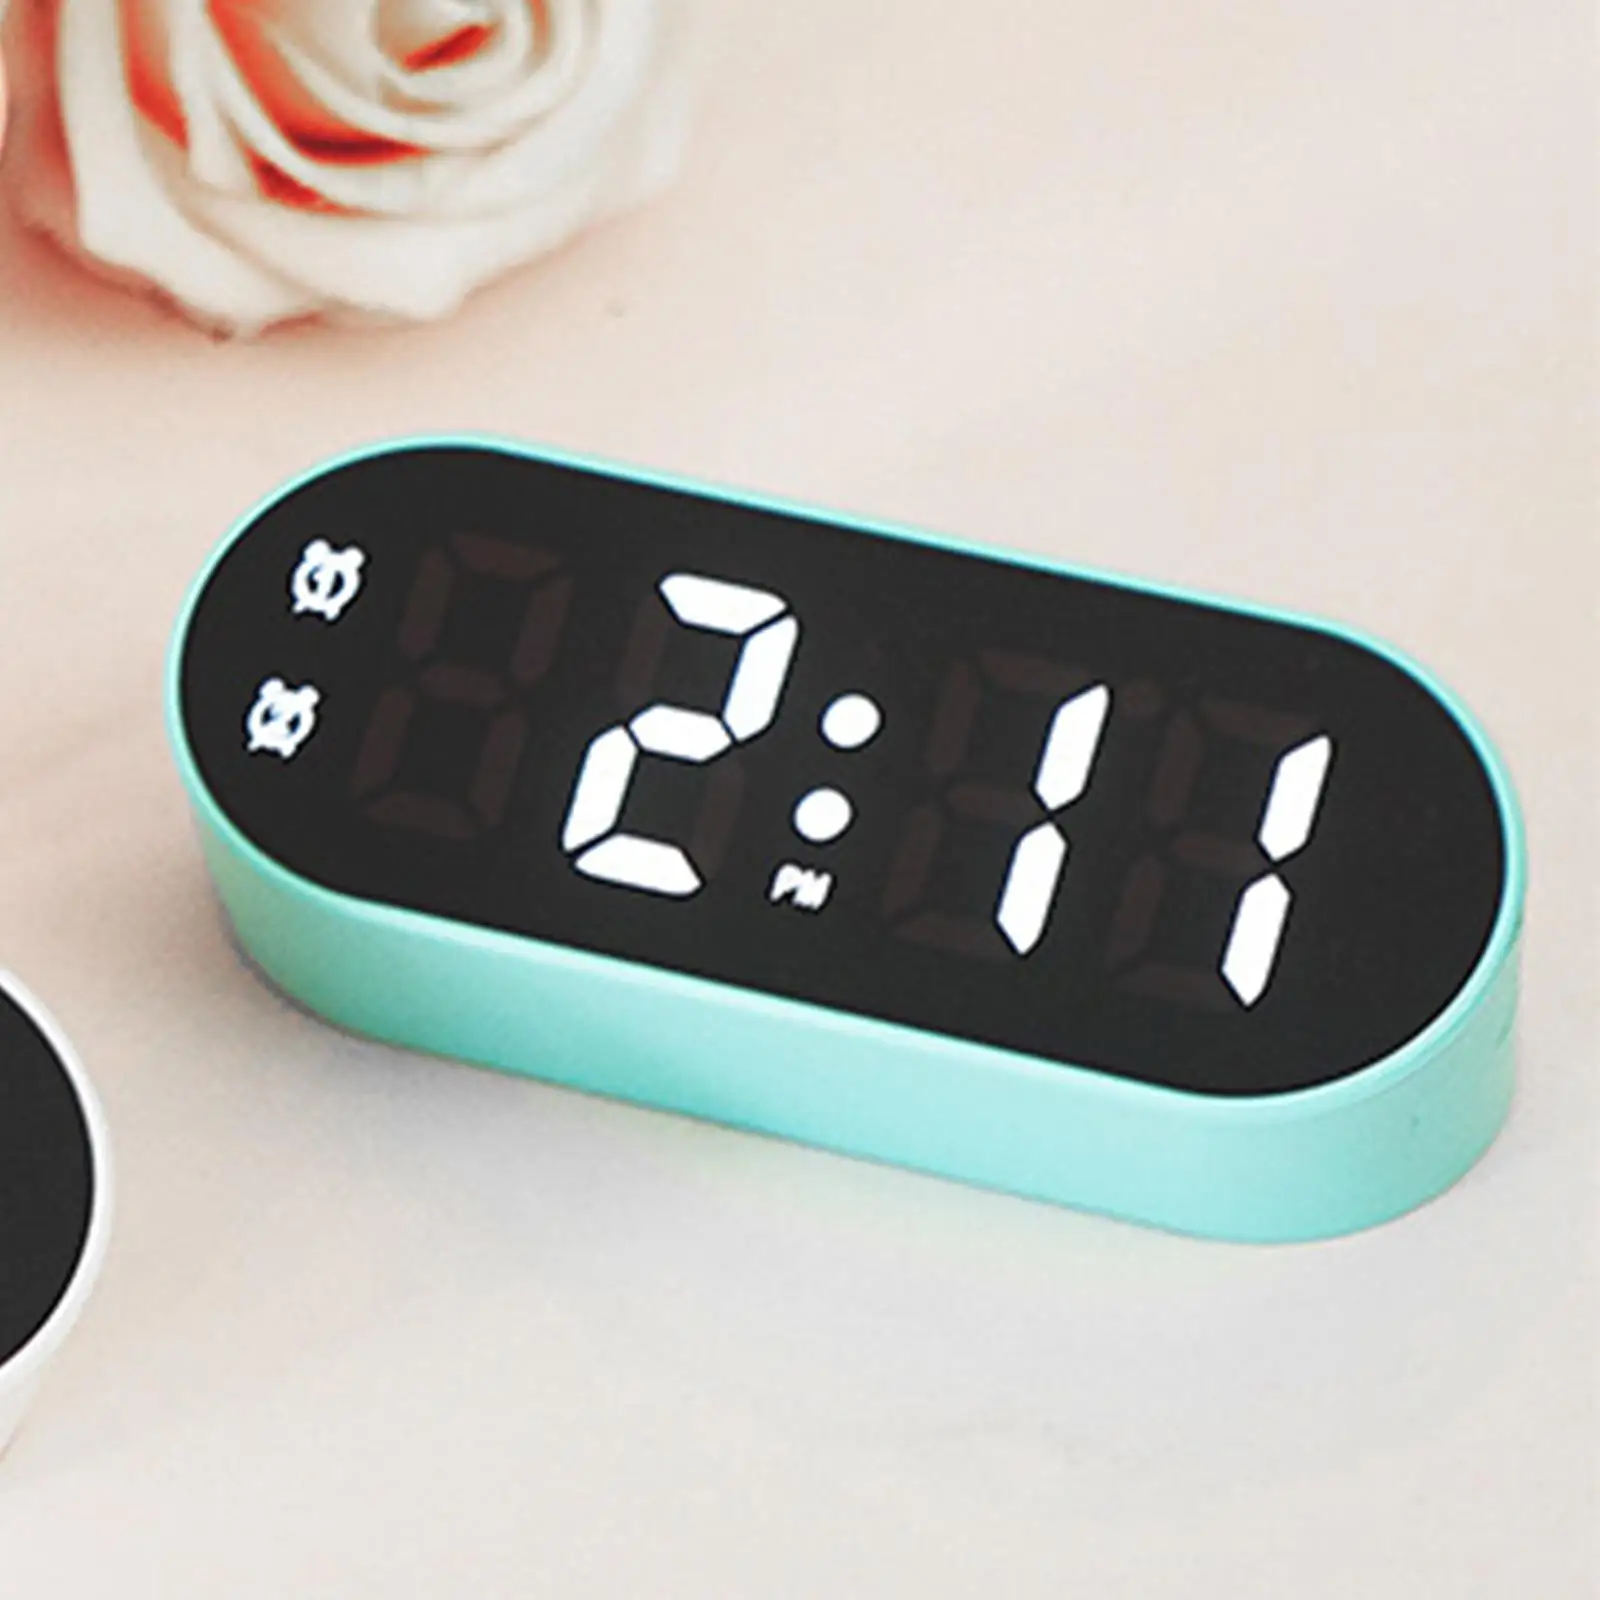 Digital Alarm Clock Electronic Clock with Snooze Large Display with Temperature Date for Desktop Travel Bedside Office Kids